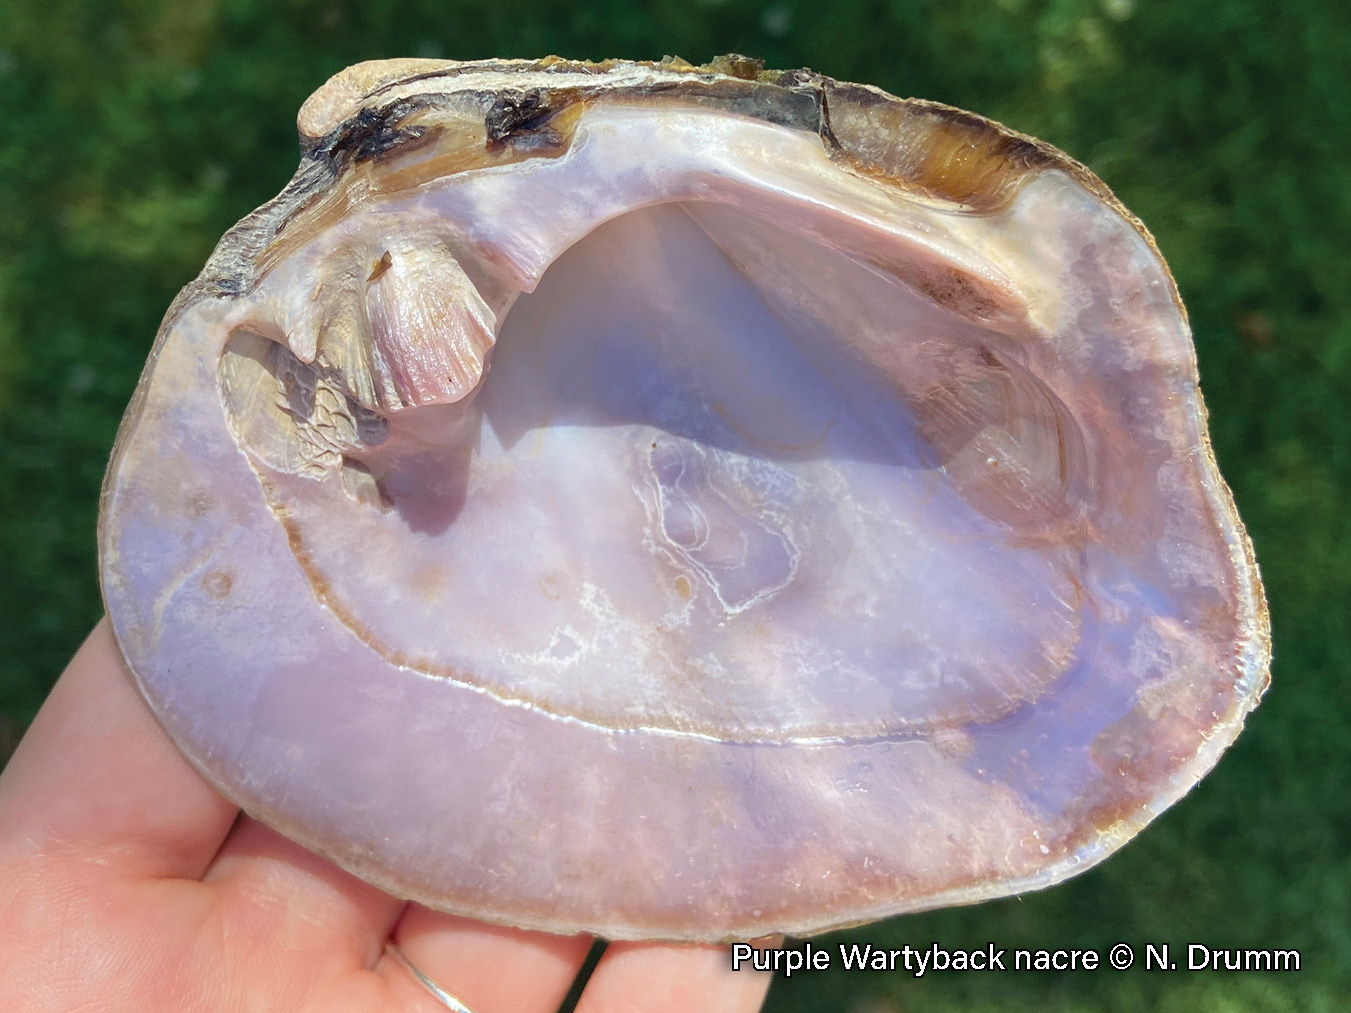 Picture of the inside shell of a purple wartyback mussel in a hand, a medium-sized mussel with a thick shell that has a purple nacre